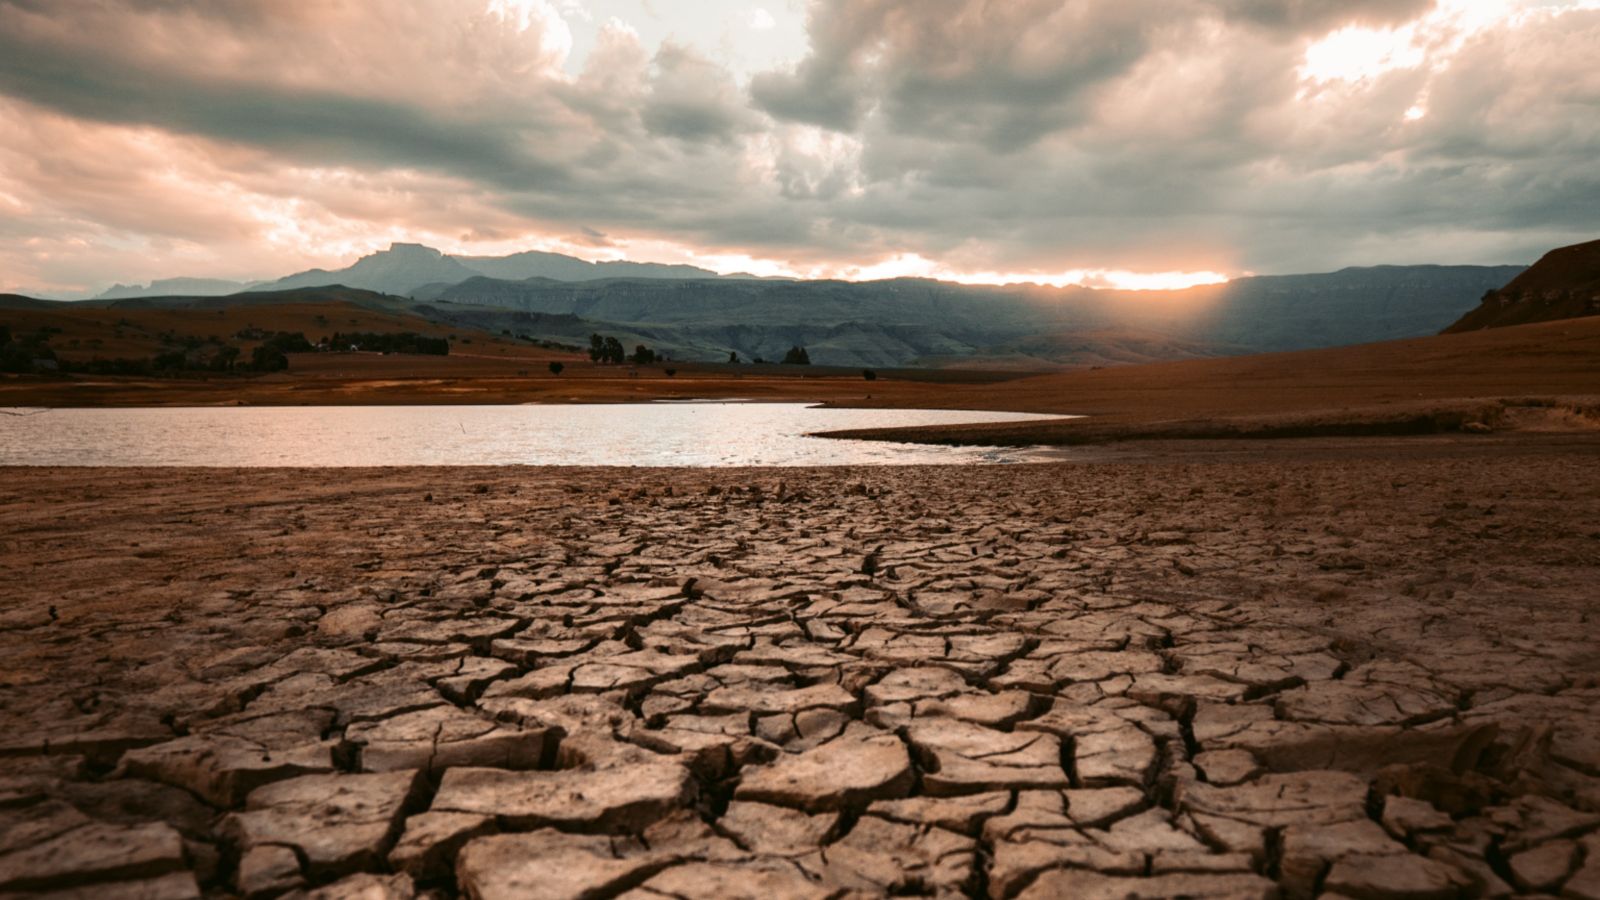 Dry cracked lake bed with little water against a background of a setting sun over mountains.